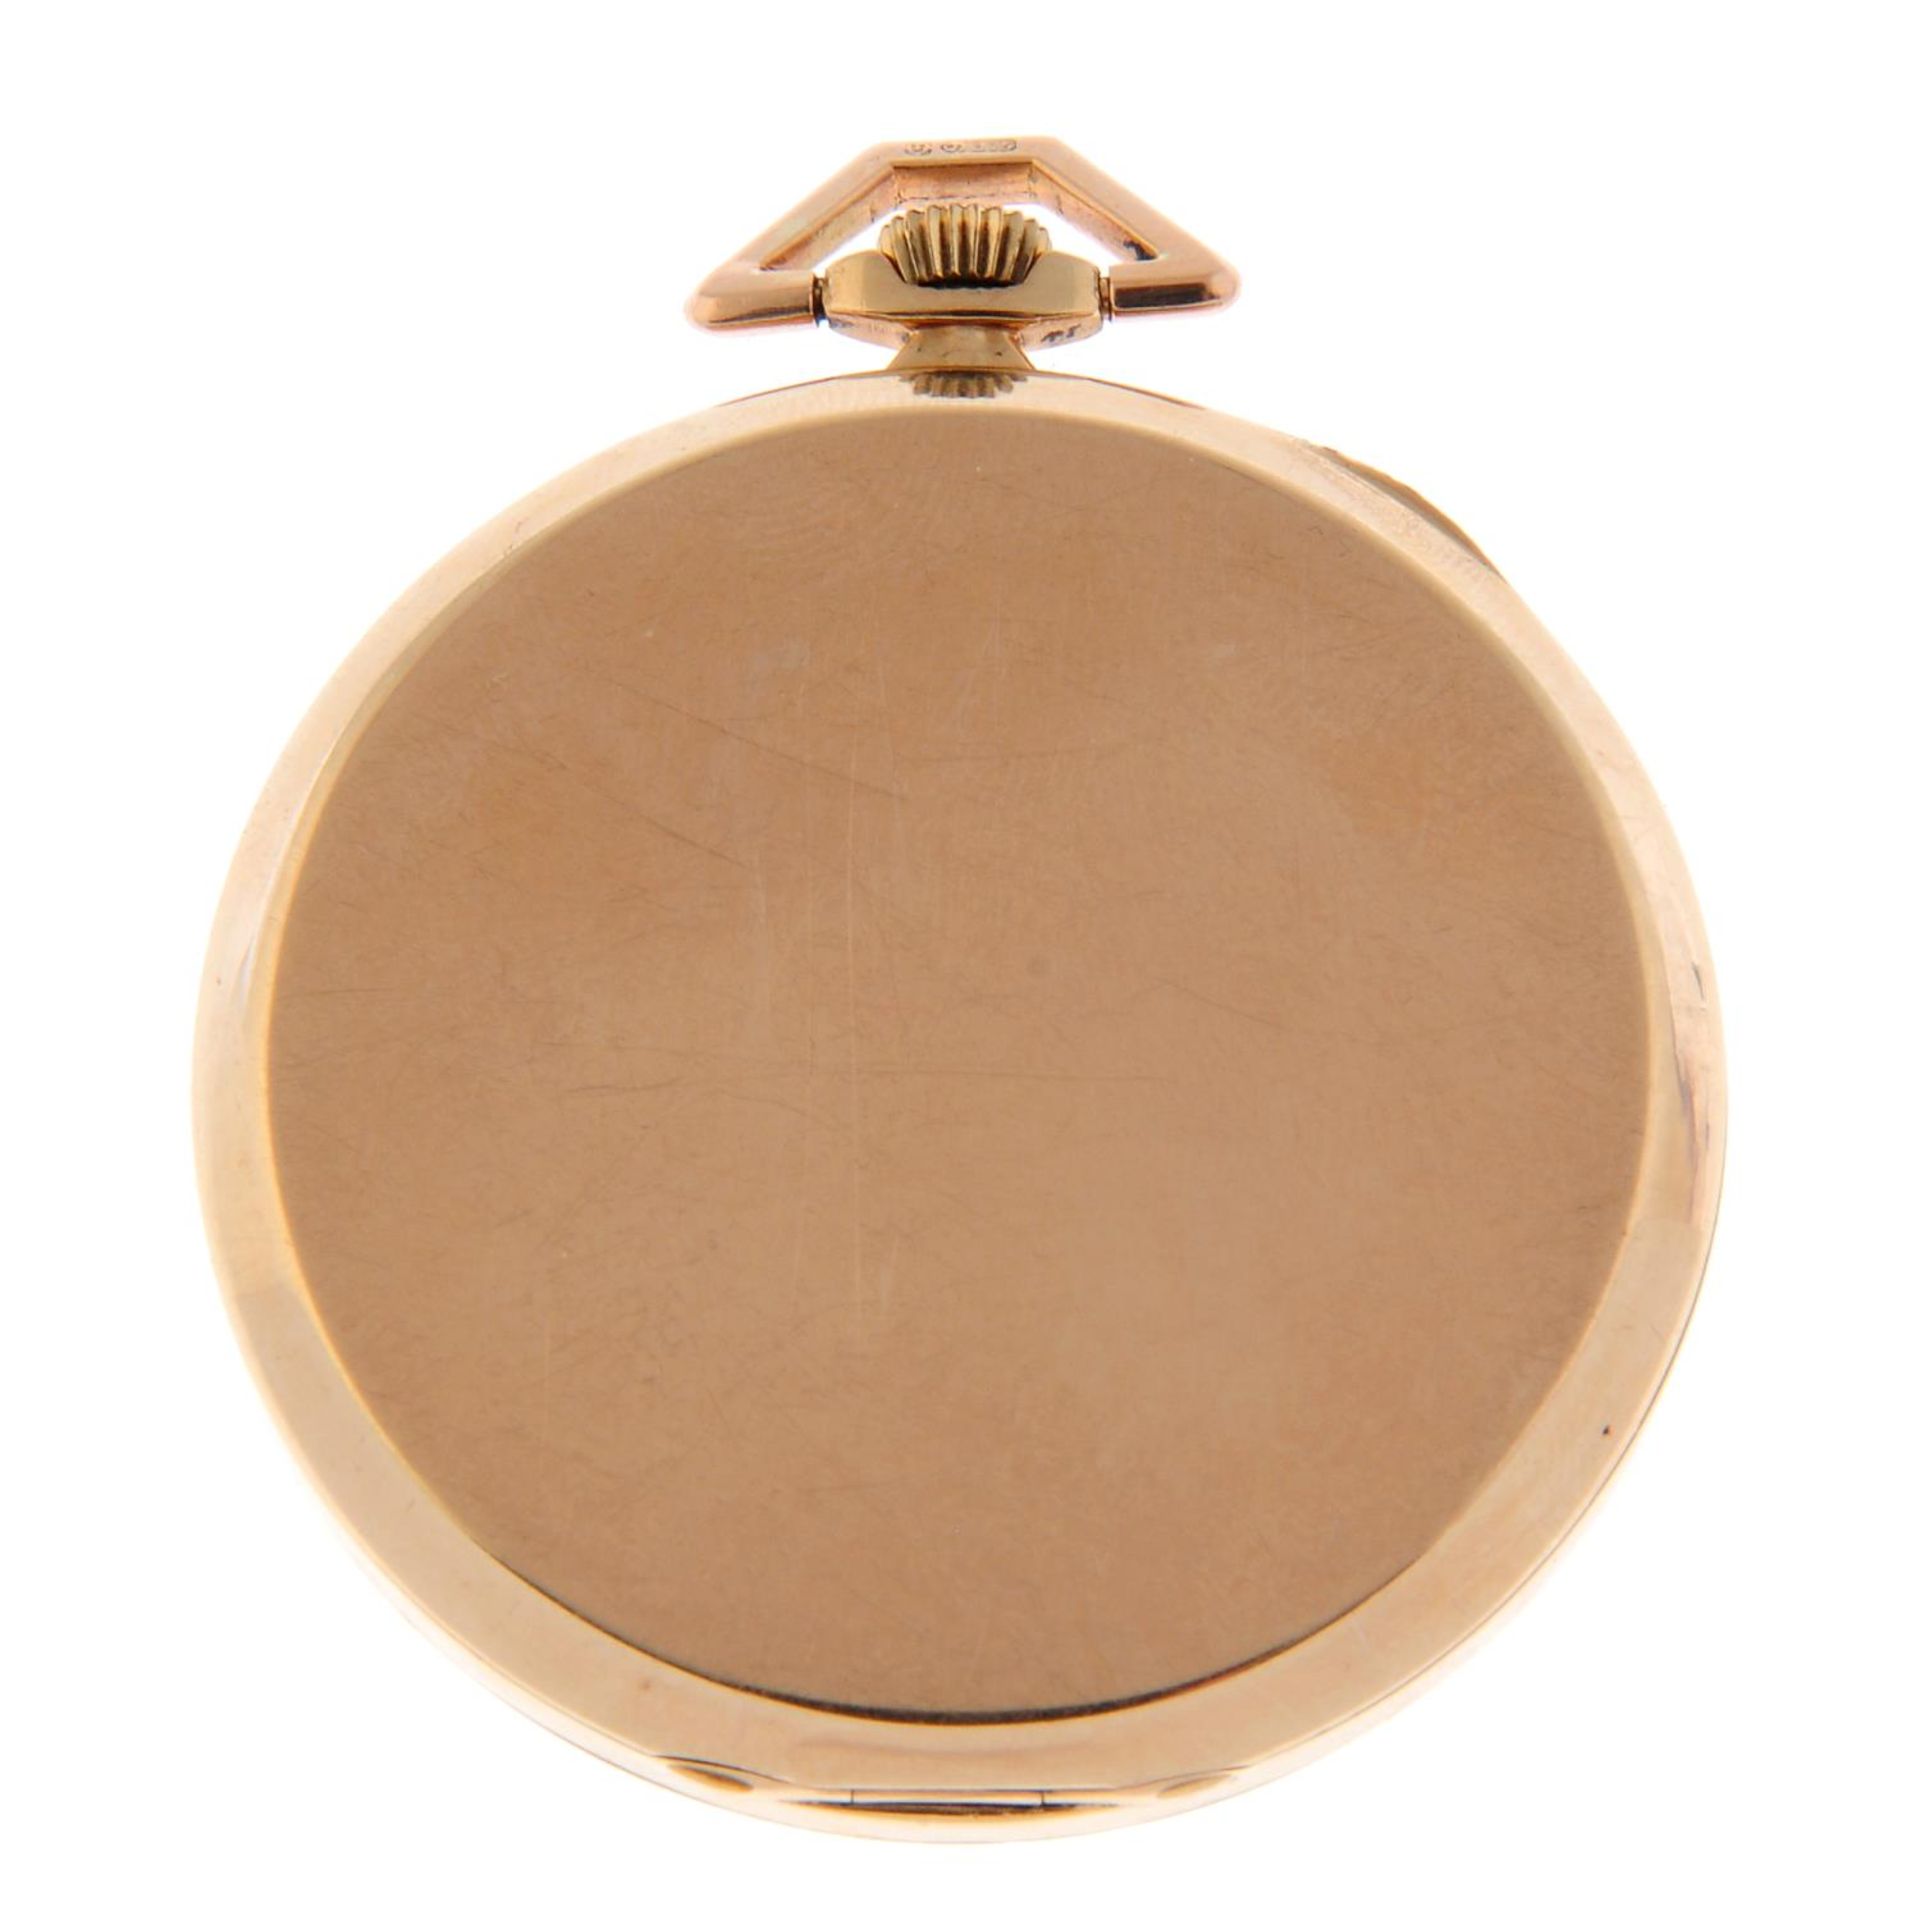 An open face pocket watch by E. - Image 2 of 3